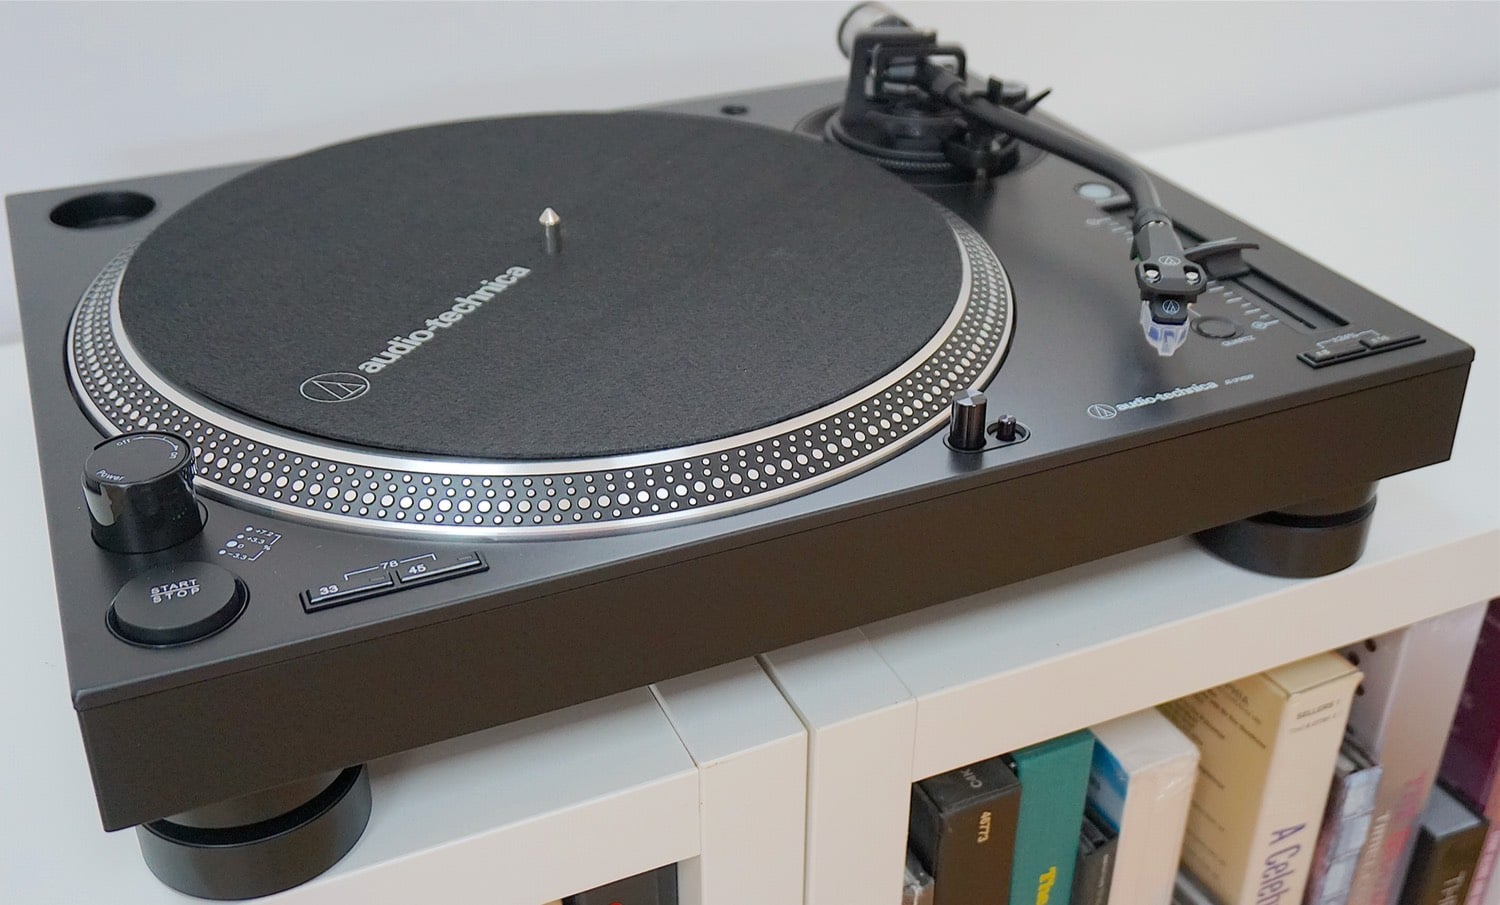 Audio Technica LP120 Turntable Review: High Quality Turntable (Pros & Cons)